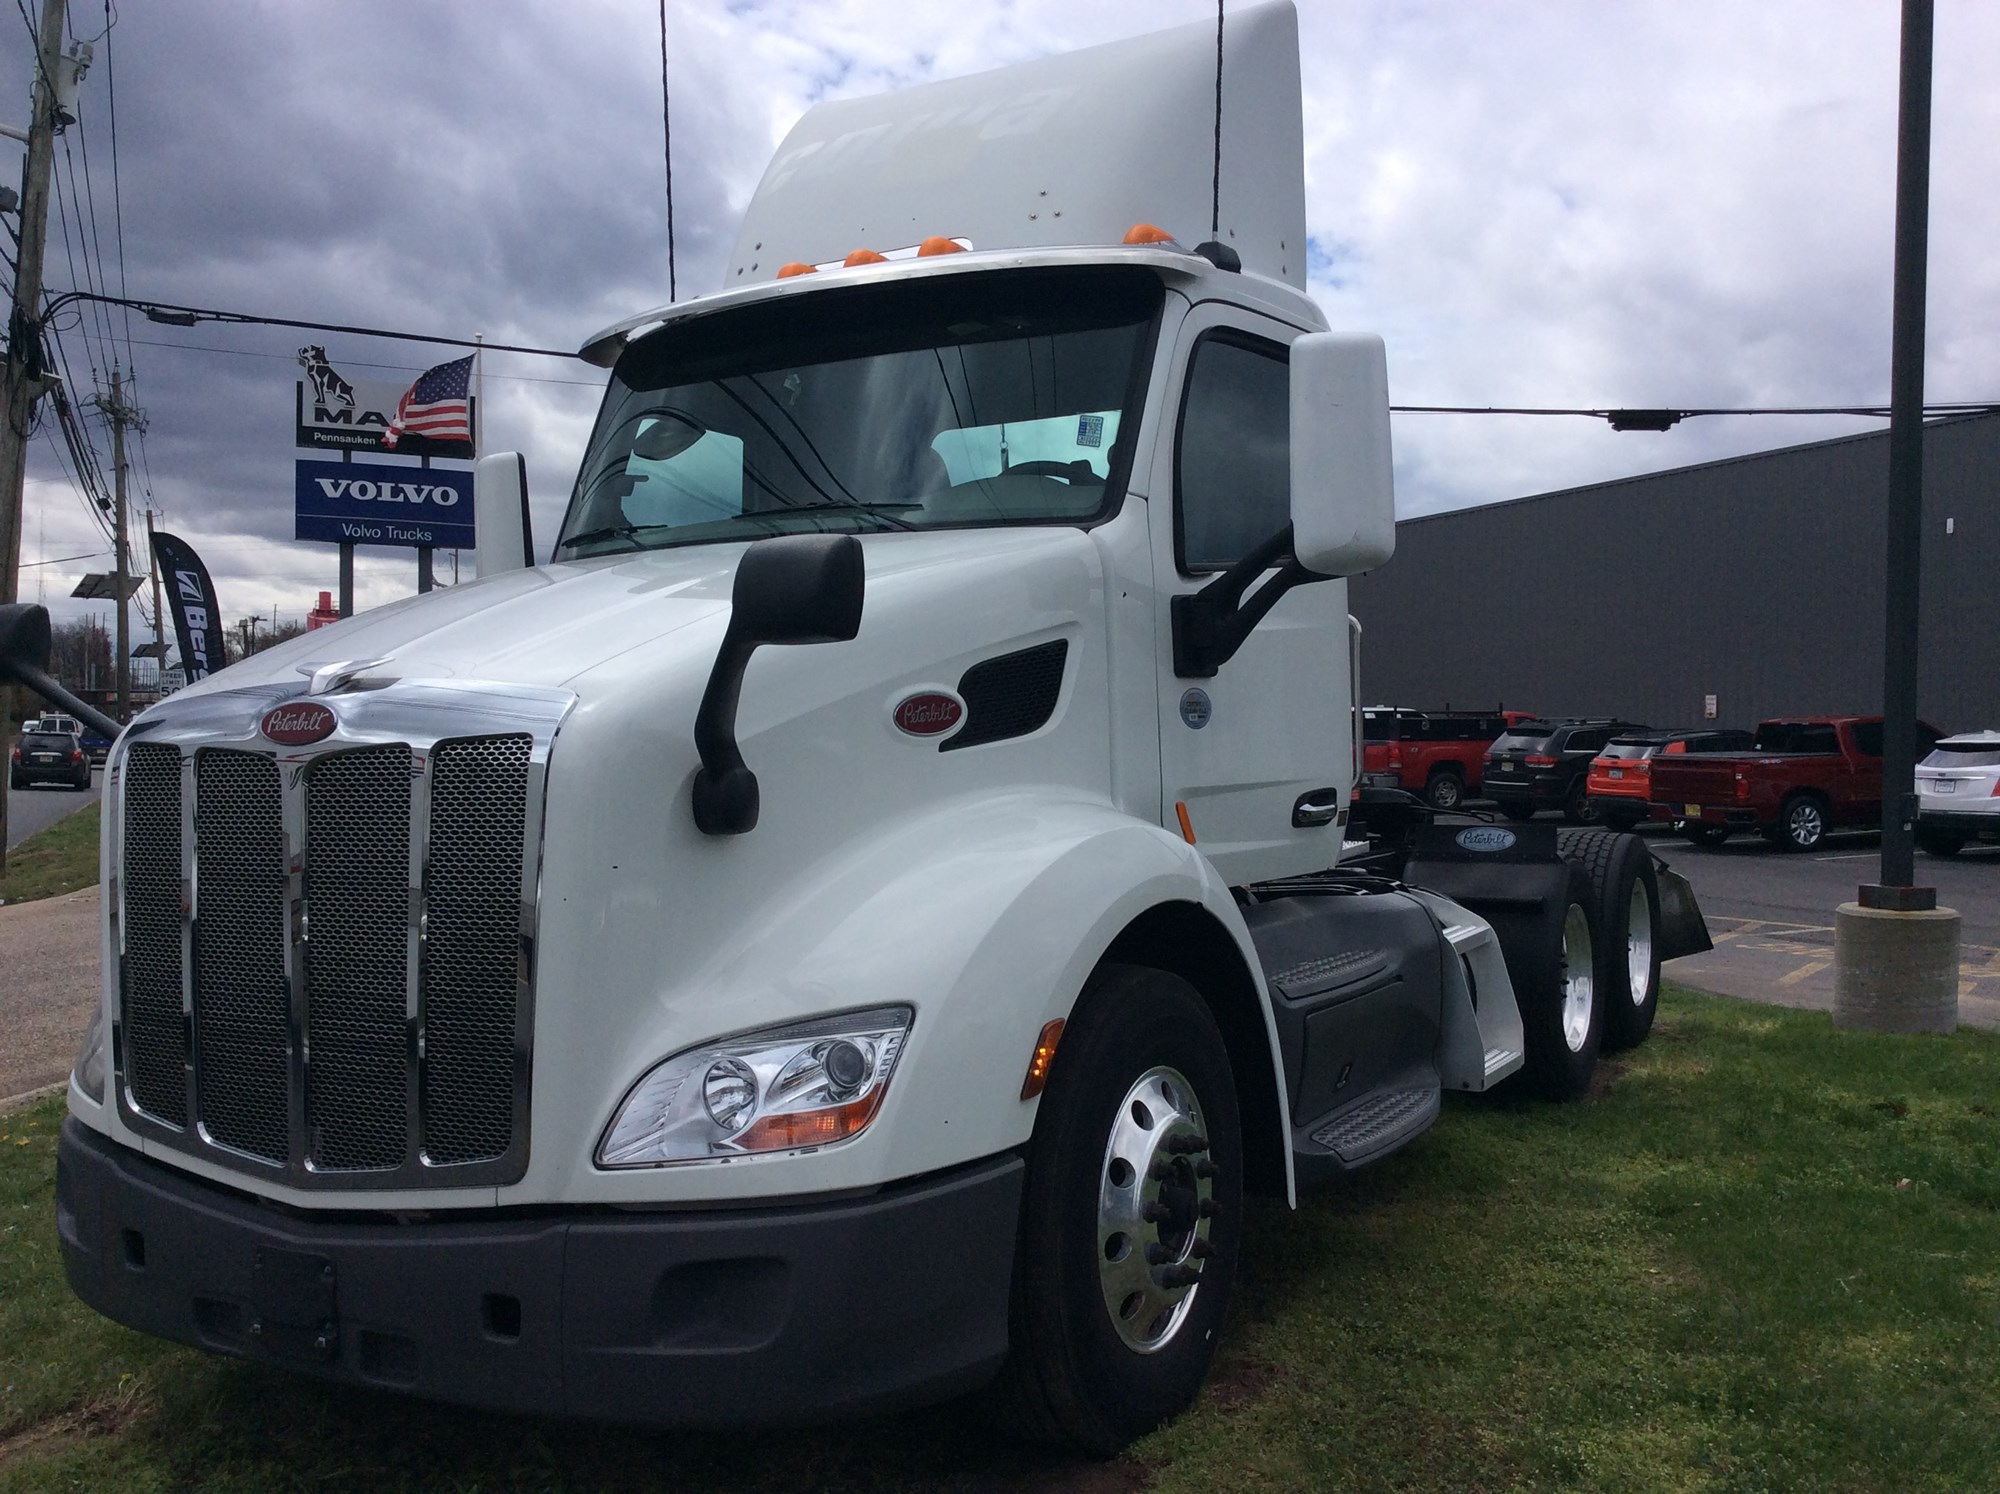 Used Truck Inventory - 1000879 01 - 23